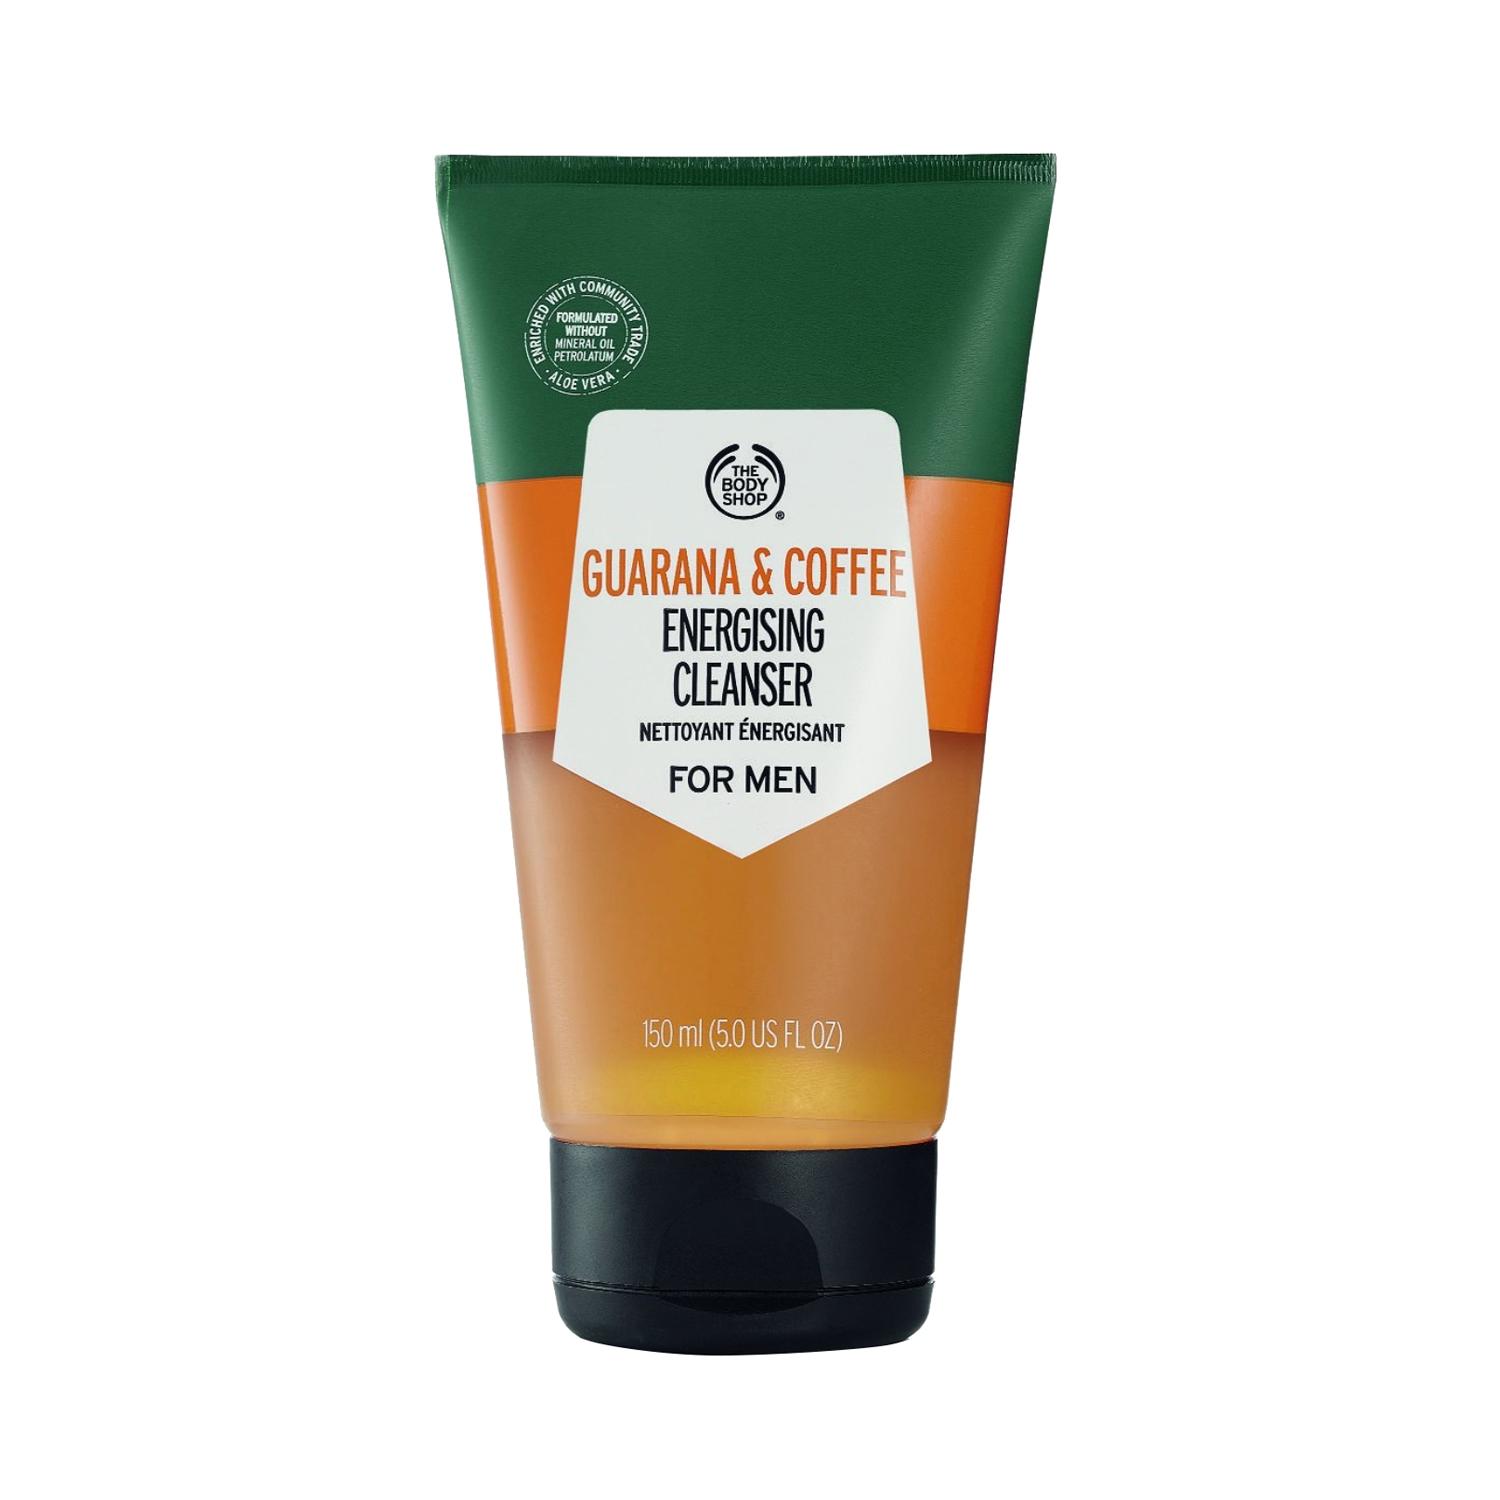 the body shop guarana and coffee energising cleanser for men (150ml)